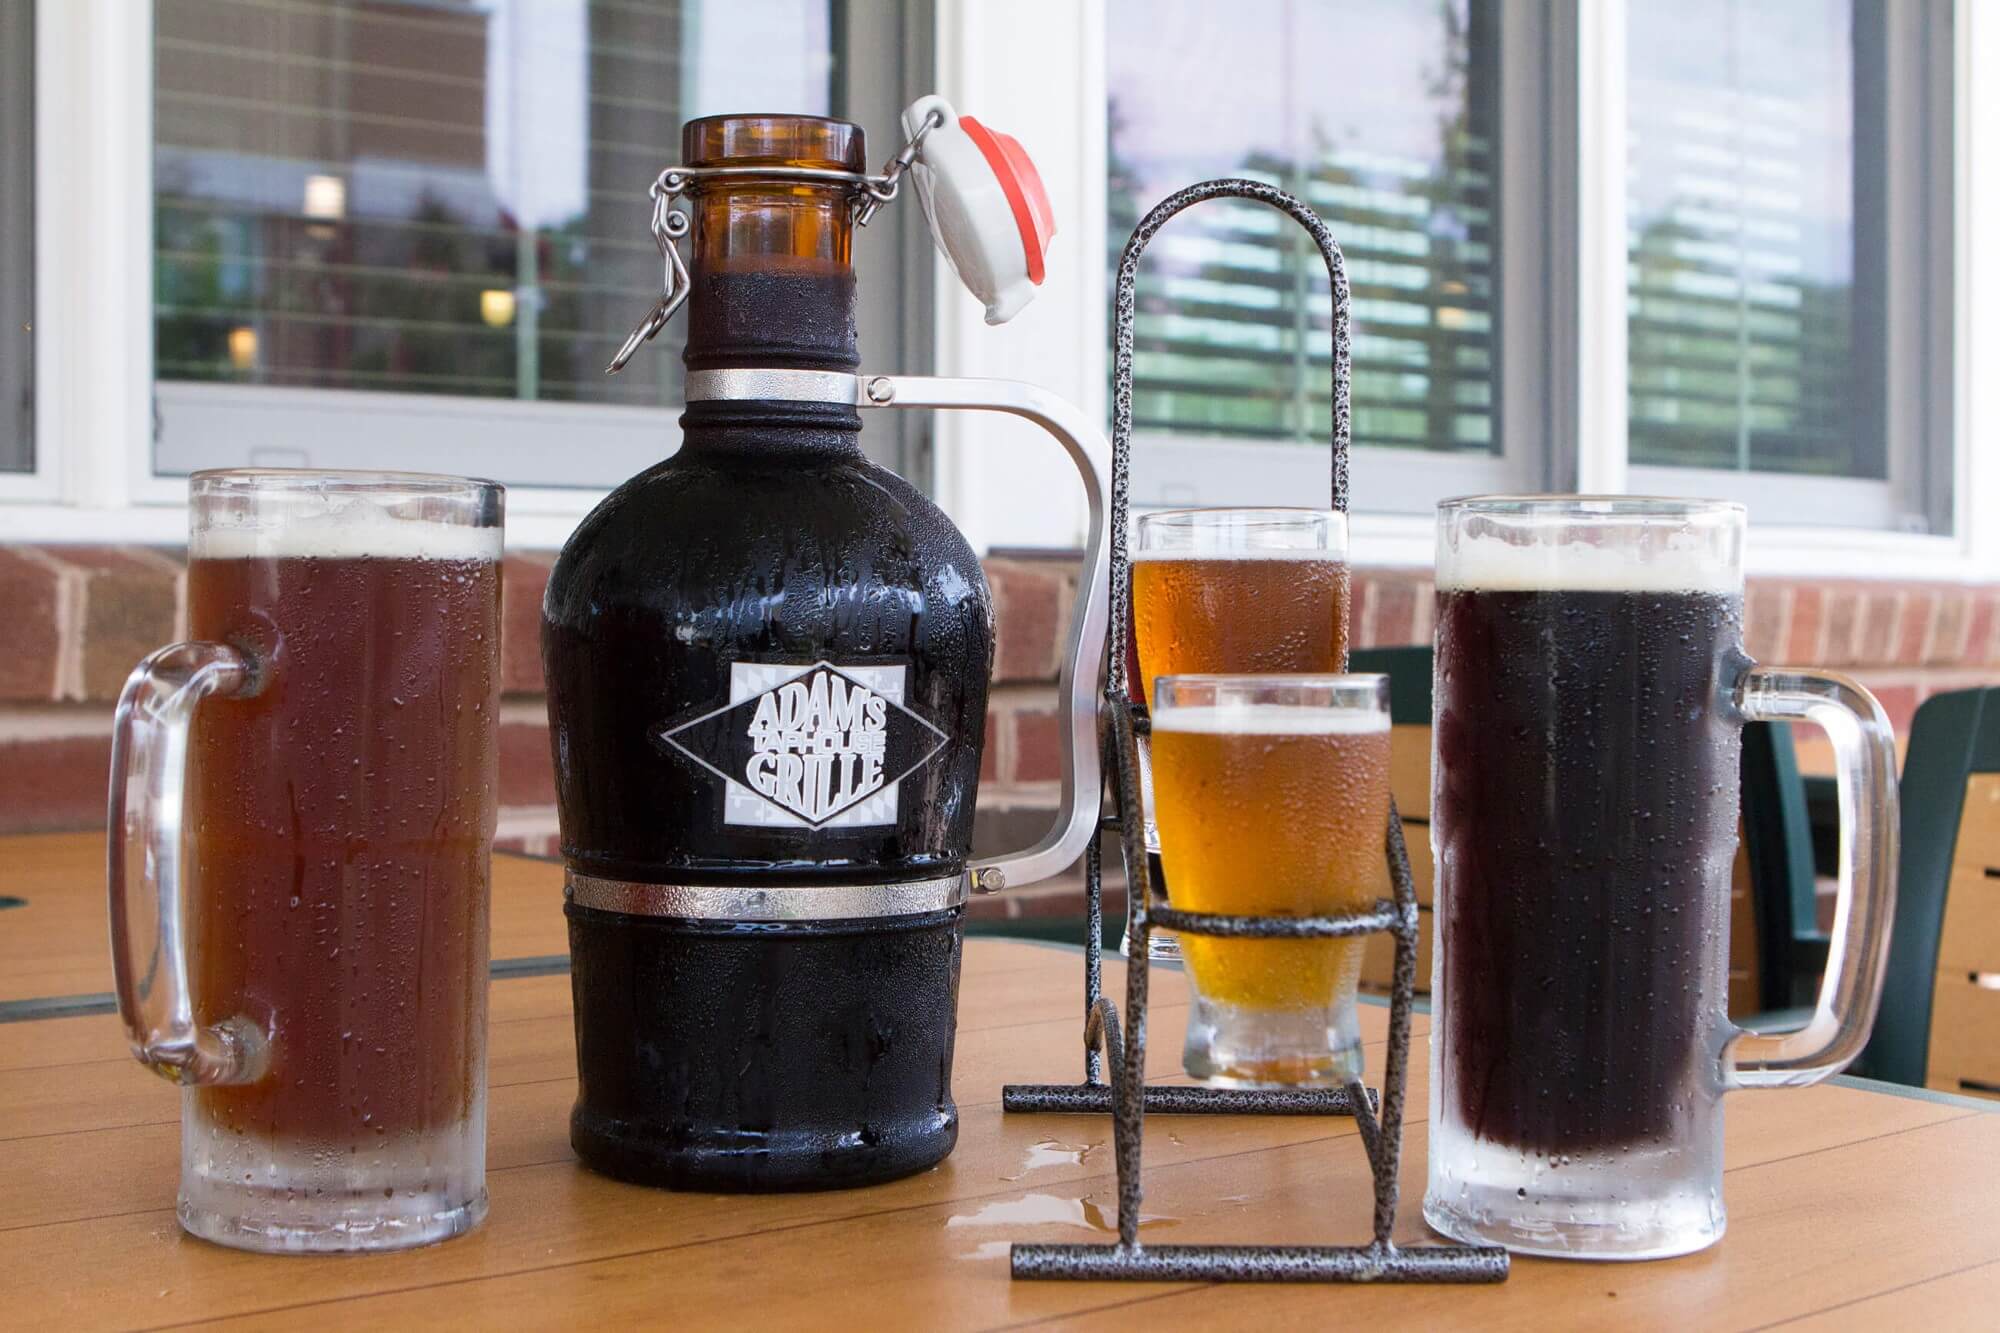 Adams Grille & Taphouse growler of beer, pints and a flight of beer